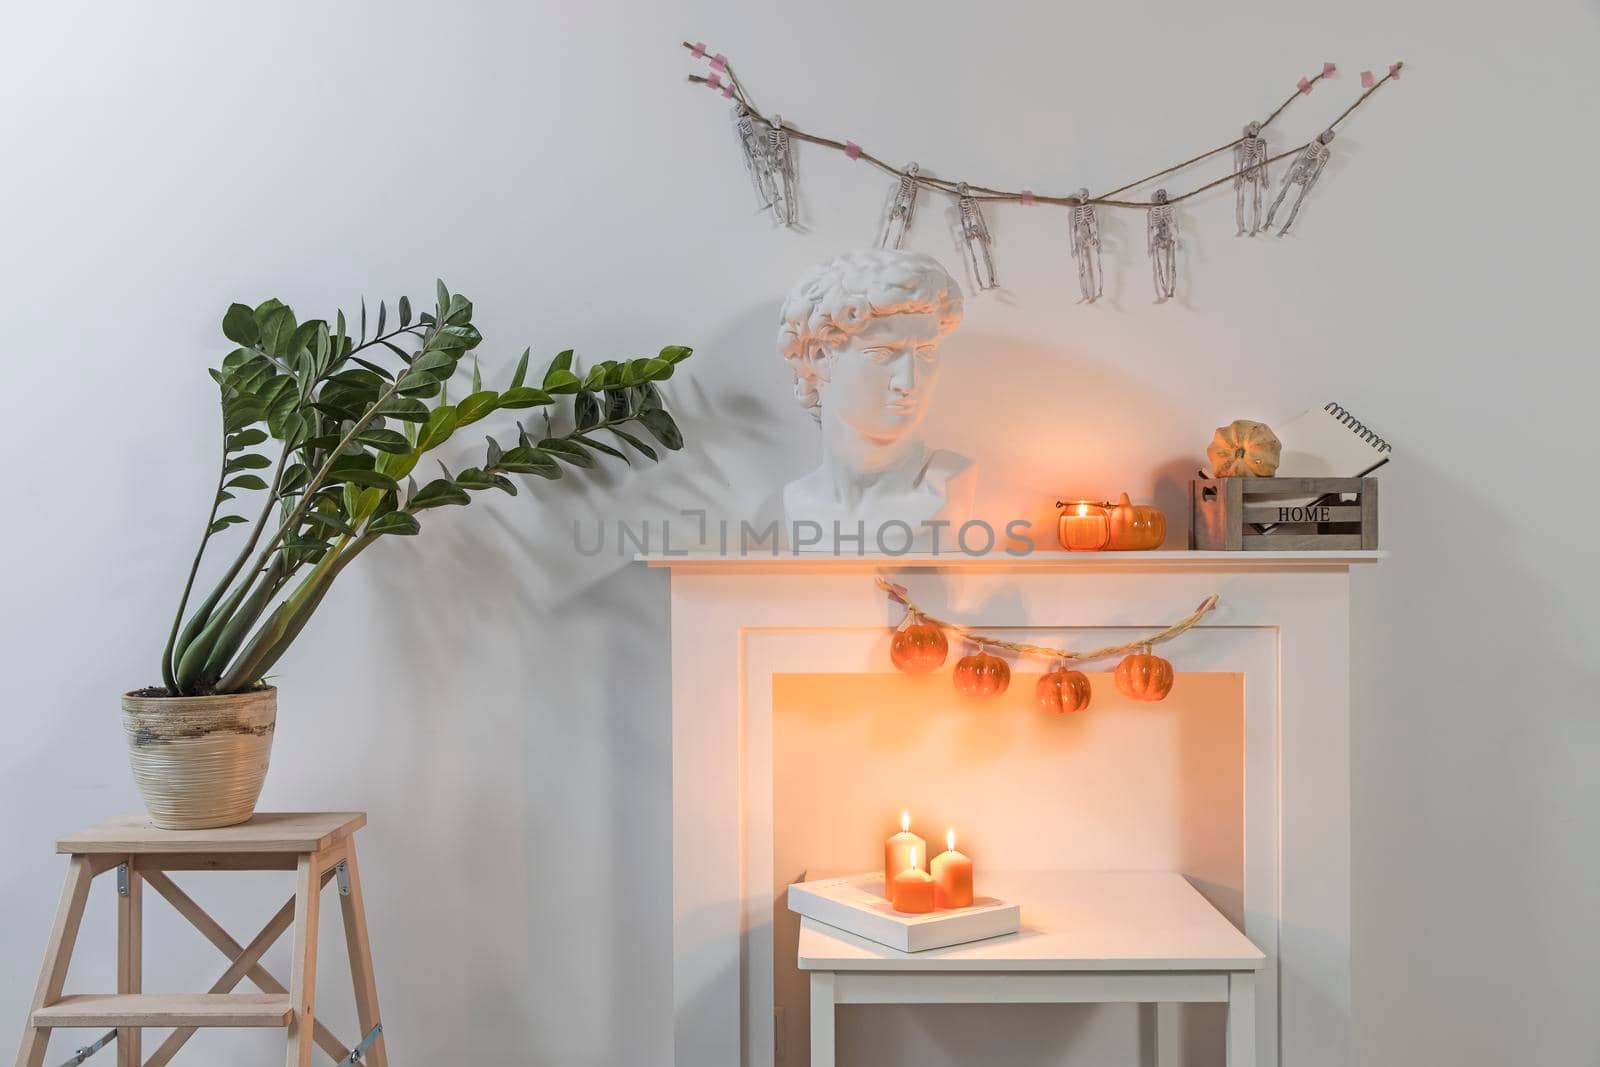 Apollo's plaster head. Zamioculcas plant in clay pot on stool. A garland of skeletons hangs on wall. A garland of plastic pumpkins hangs from fireplace. The interior is decorated for Halloween.